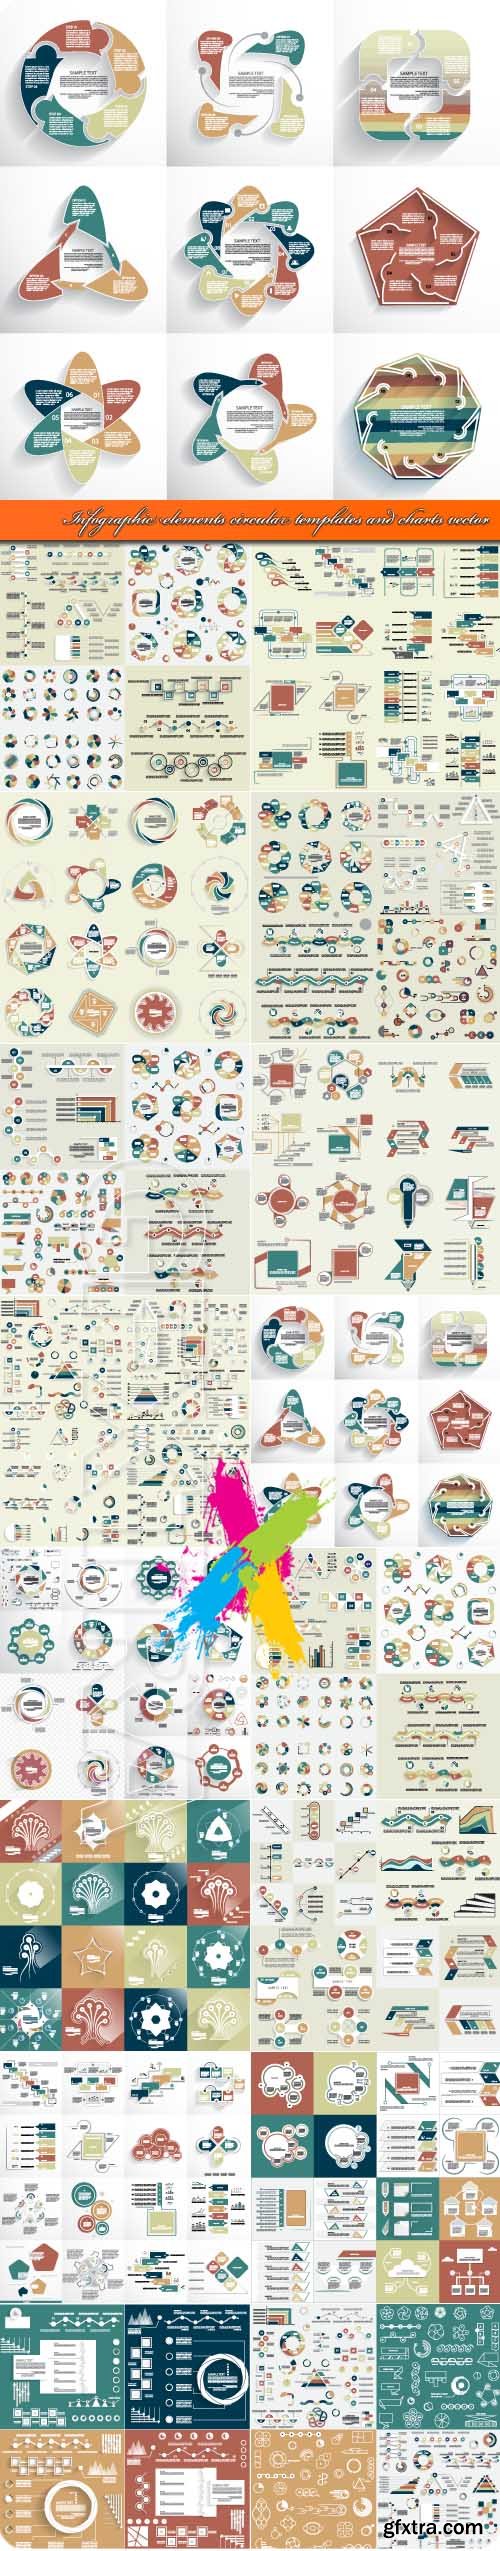 Infographic elements circular templates and charts vector